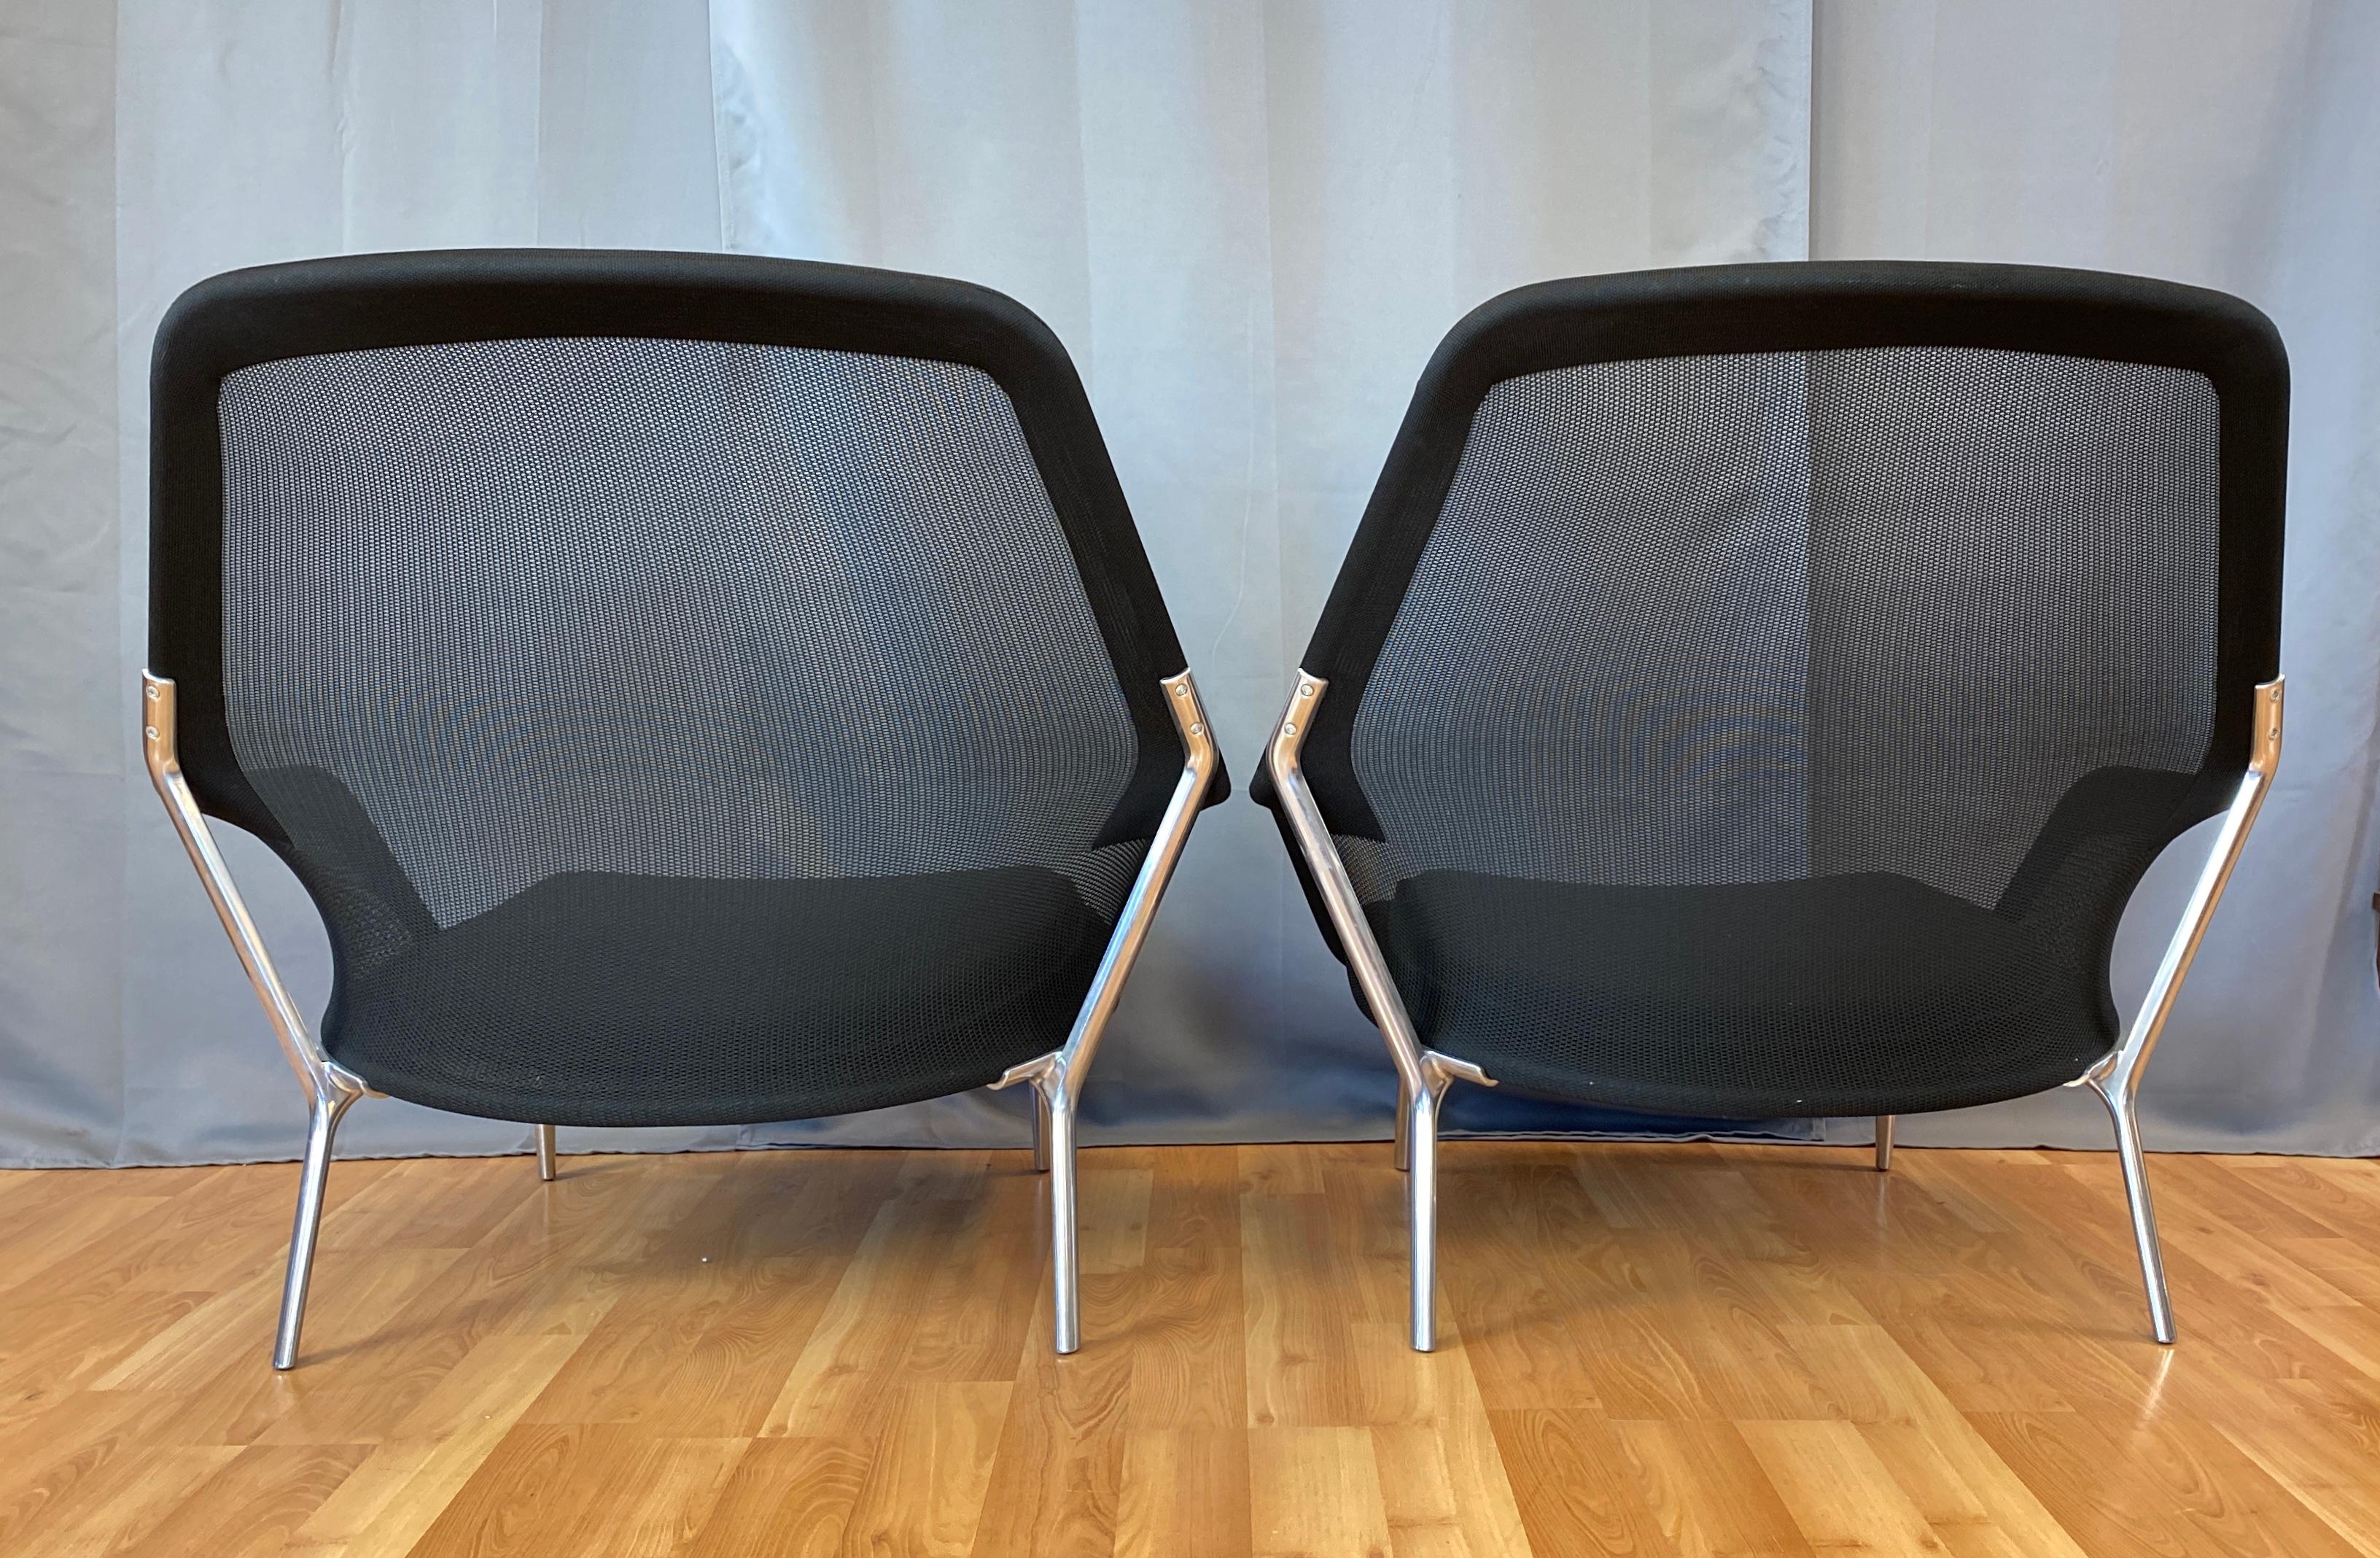 Italian Pair of Black Slow Chairs by Ronan and Erwan Bouroullec for Vitra